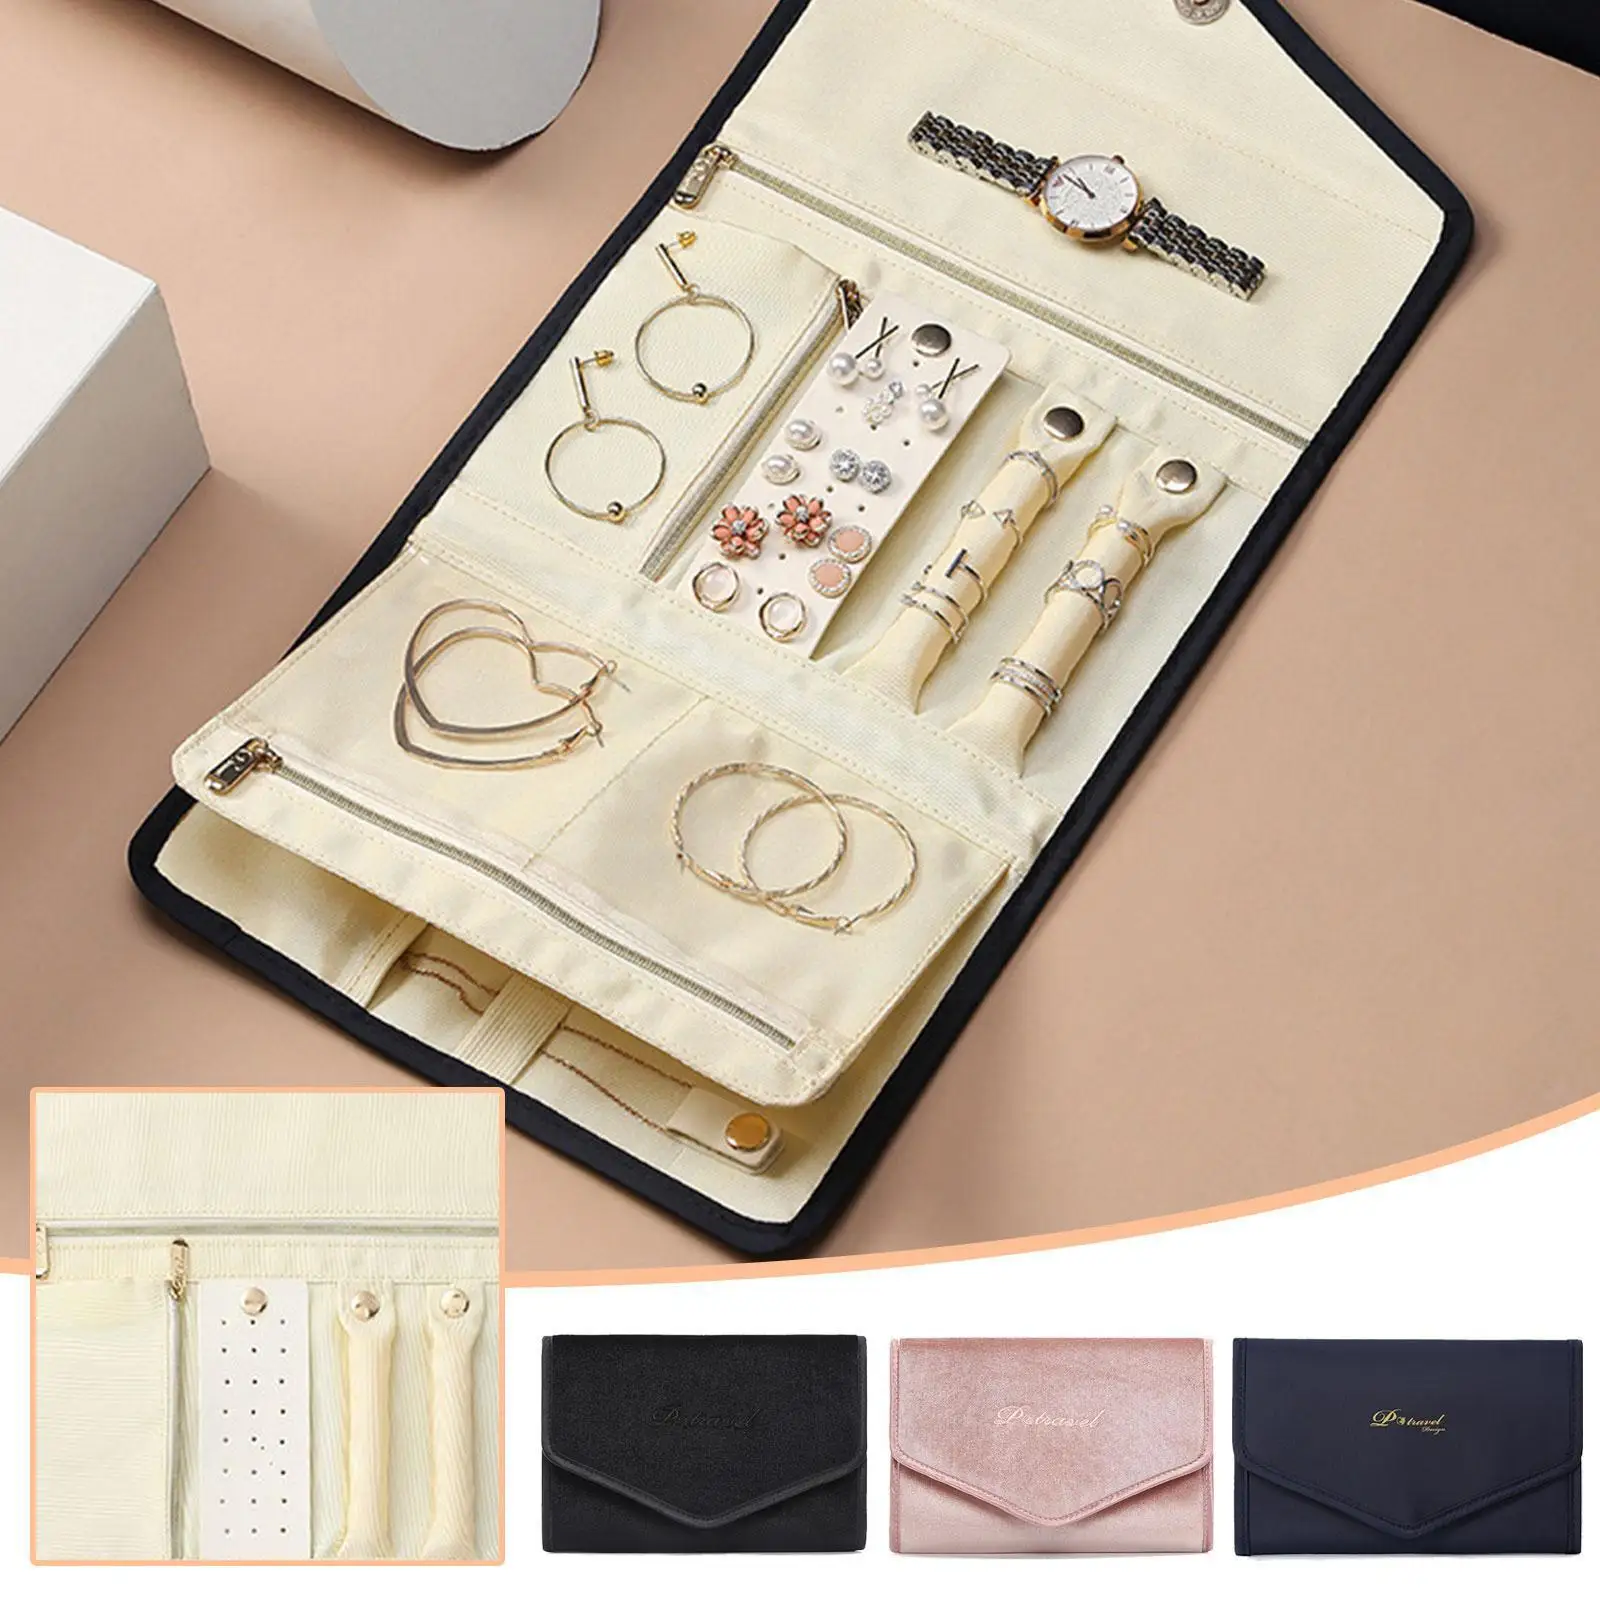 

Portable Travel Jewelry Organizer Roll Zippered Foldable Jewelry Ring Bag Studs Storage Earring Holder Carrying Case Neckla X3T8